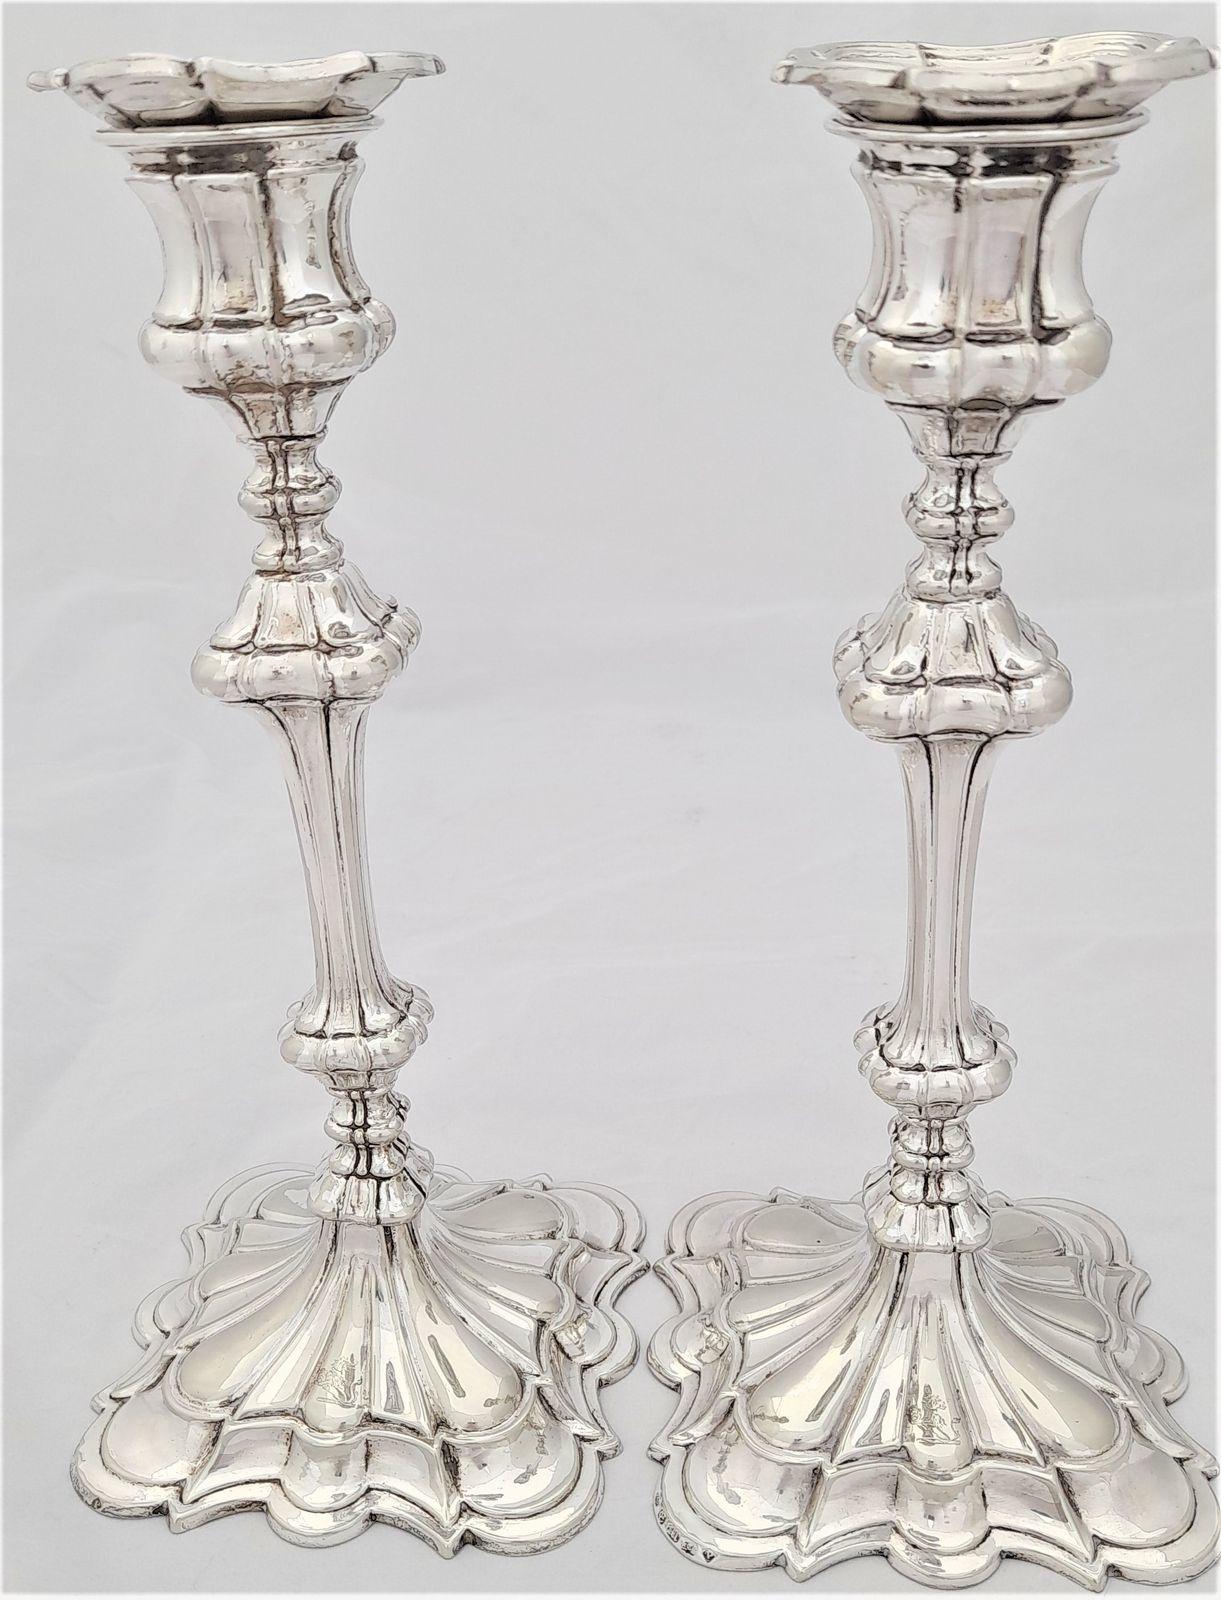 An antique pair of Elkington & Co silver plated candlesticks in the George III style marked with date code for 1854 with a family crest for Ripley  - demi lion holding a shield - square petalled weighted bases 10 inches high 1 kg weight for candles 7/8 inch diameter.